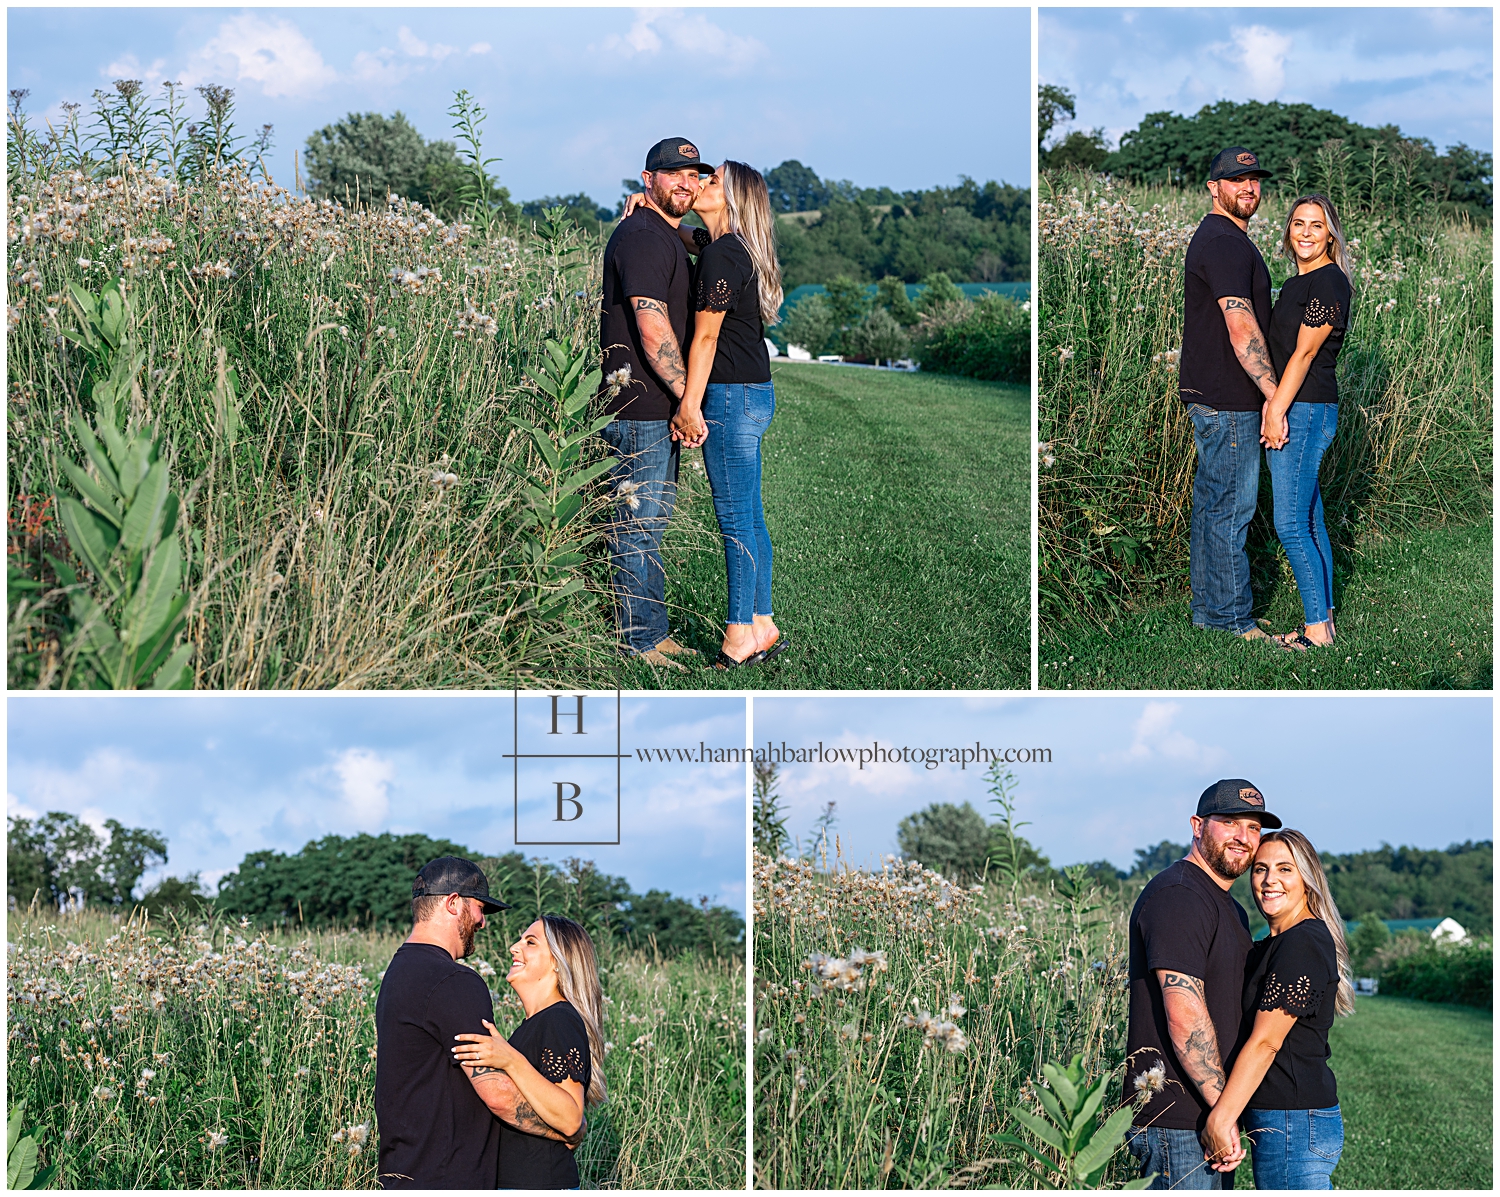 Couple poses for engagement photos with Bramblewood barn in background.